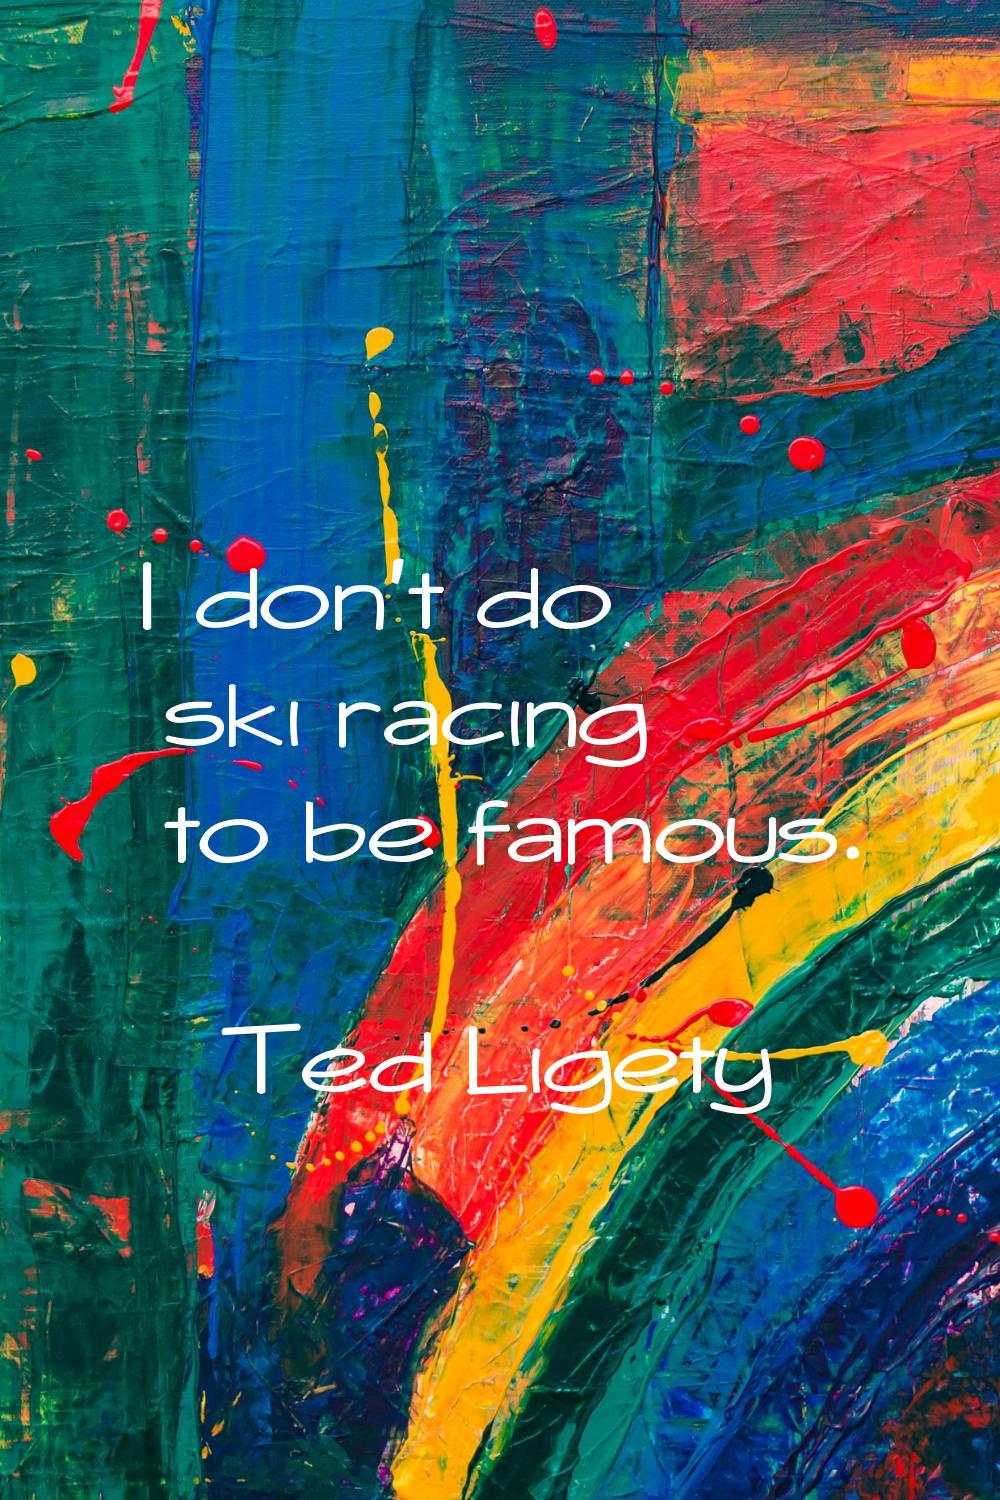 I don't do ski racing to be famous.